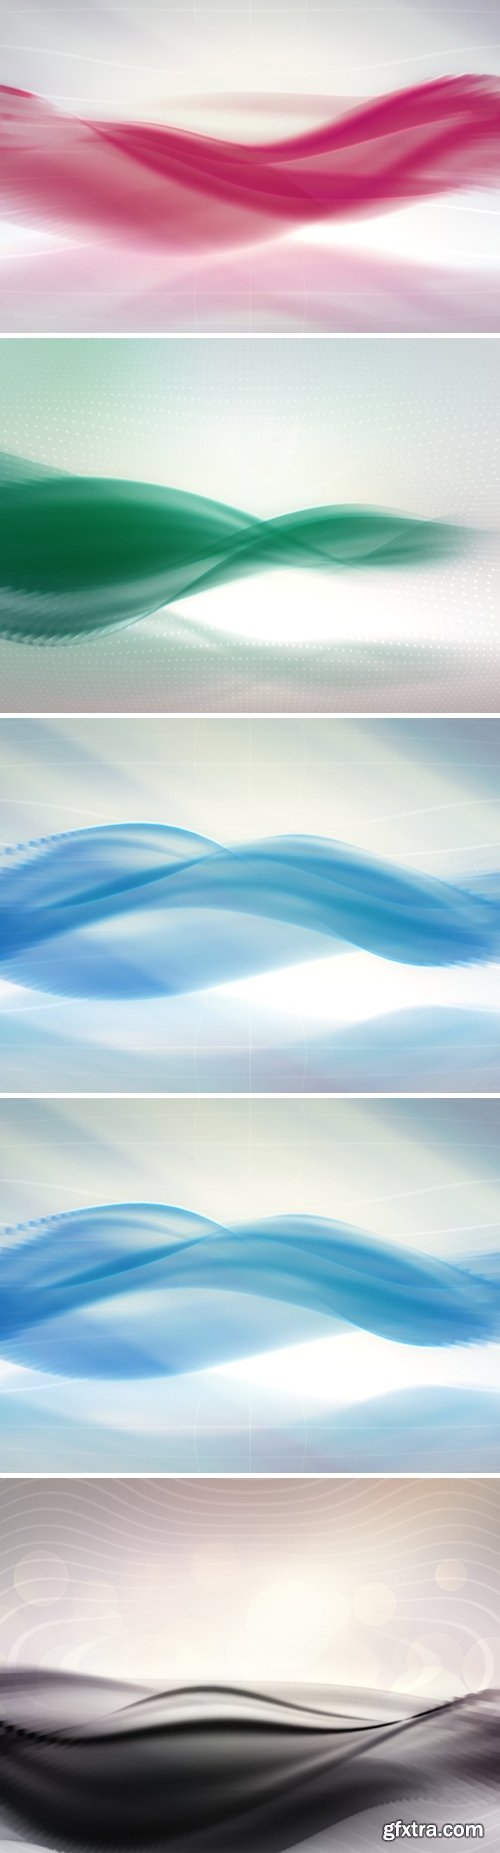 48 Abstract Waves Backgrounds